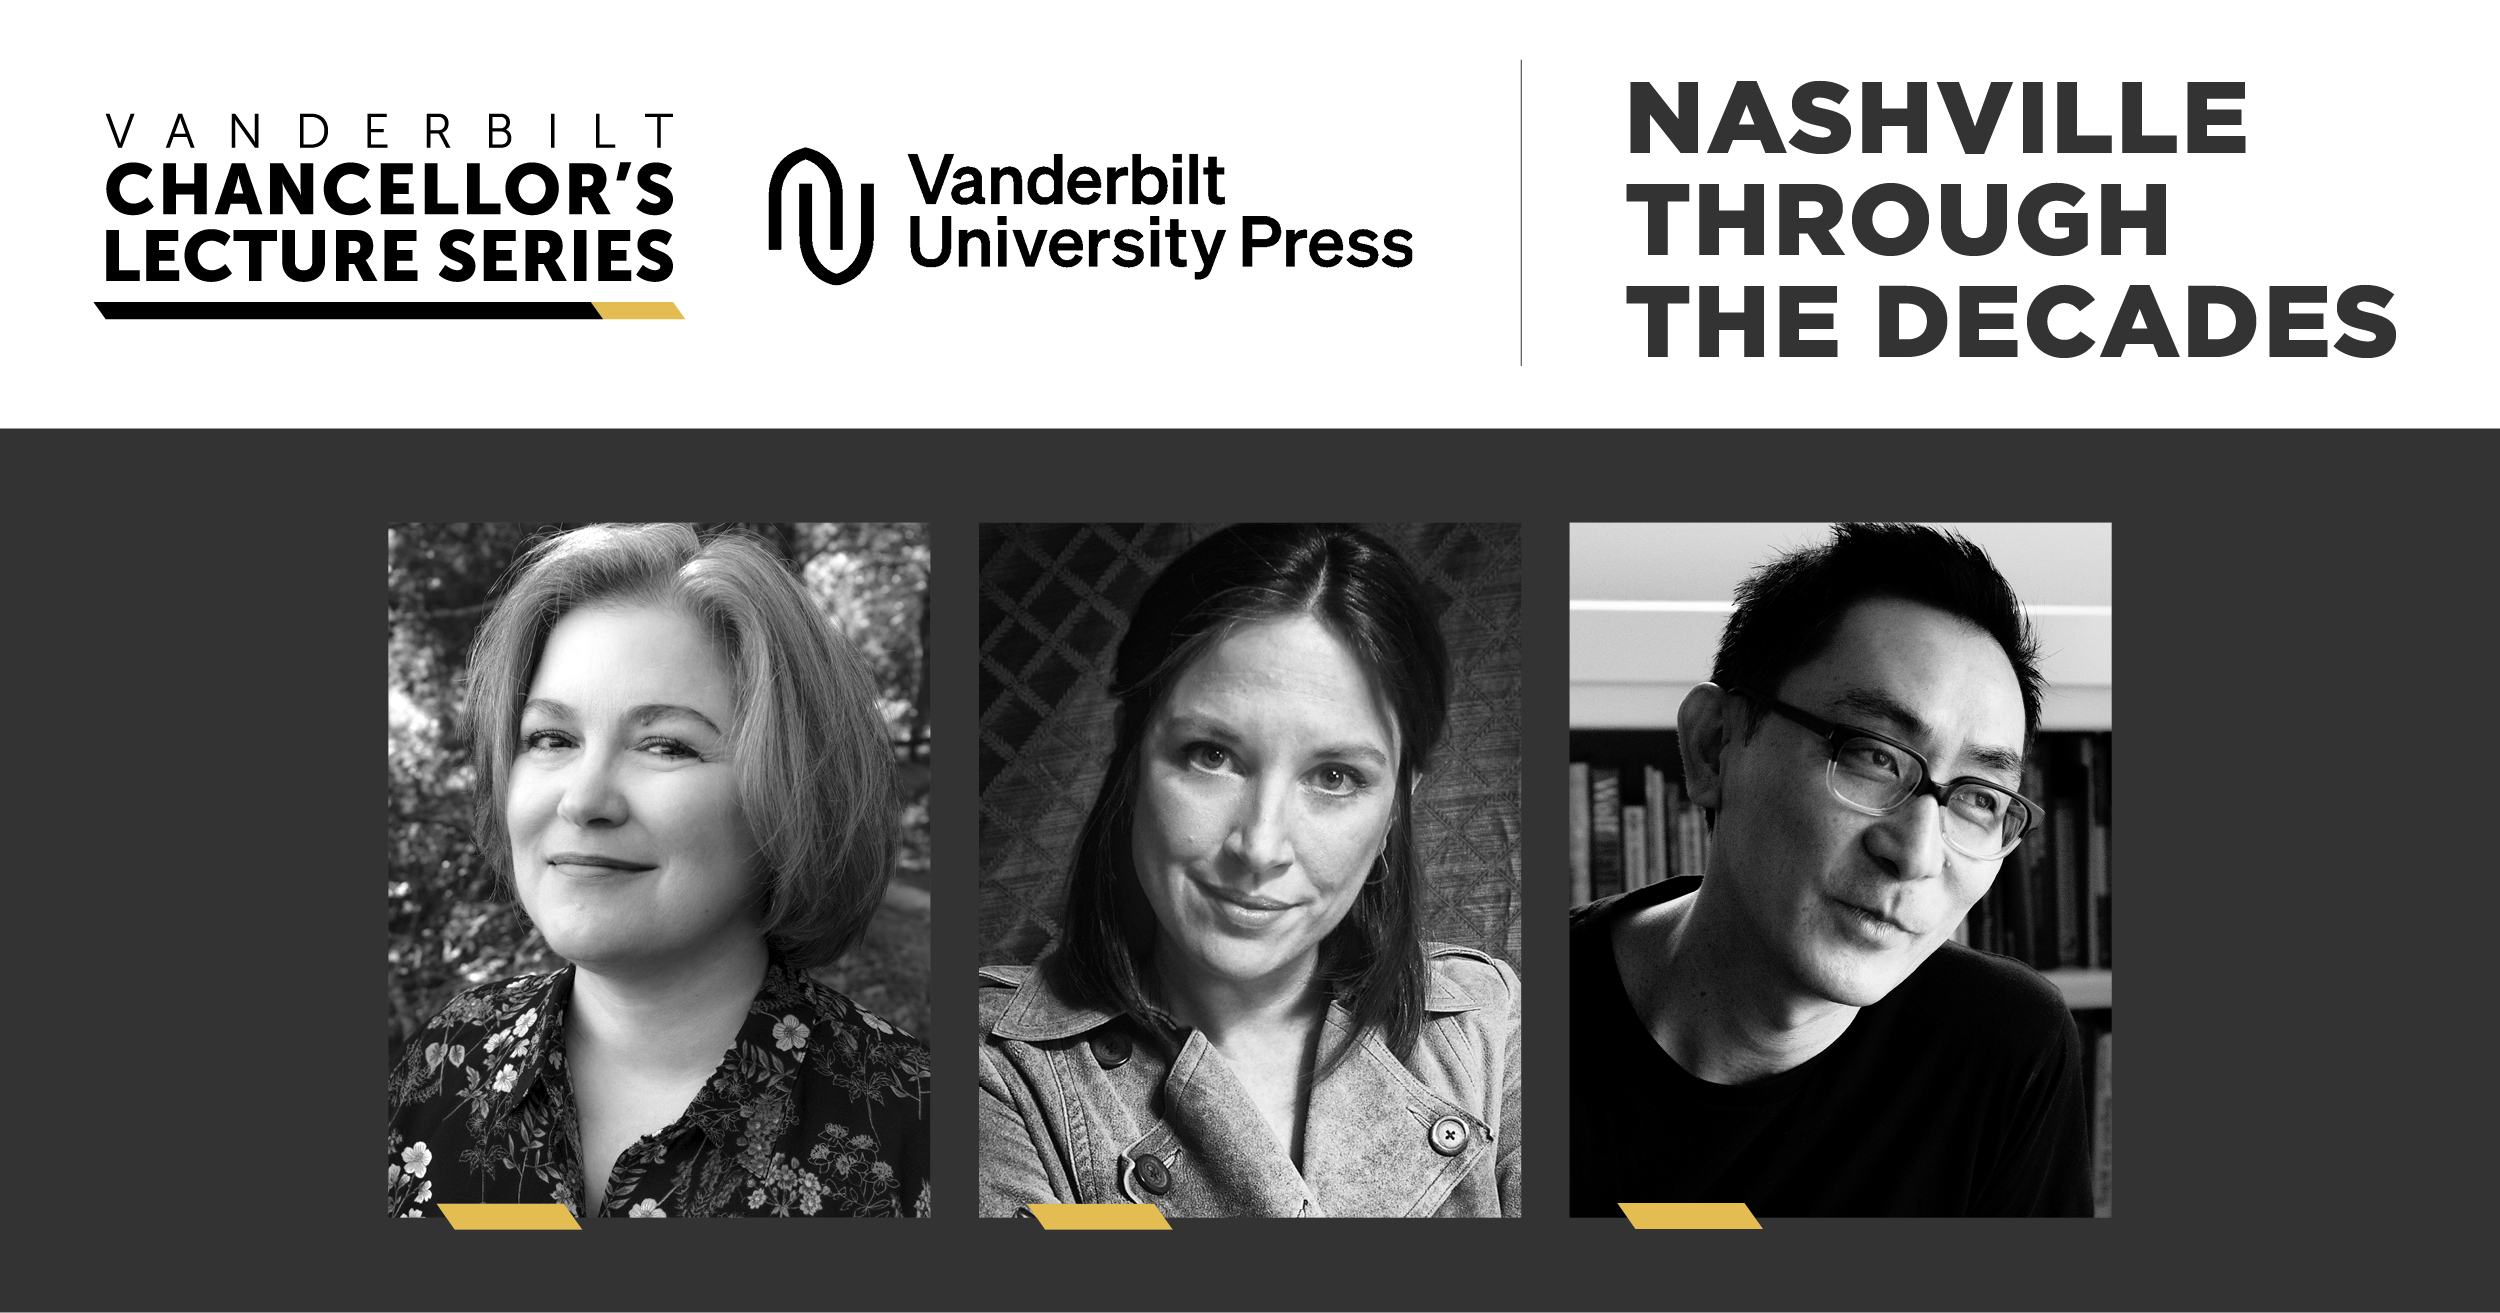 WATCH: Author and ‘New York Times’ columnist Margaret Renkl, fellow writers discuss changes in Nashville and the South